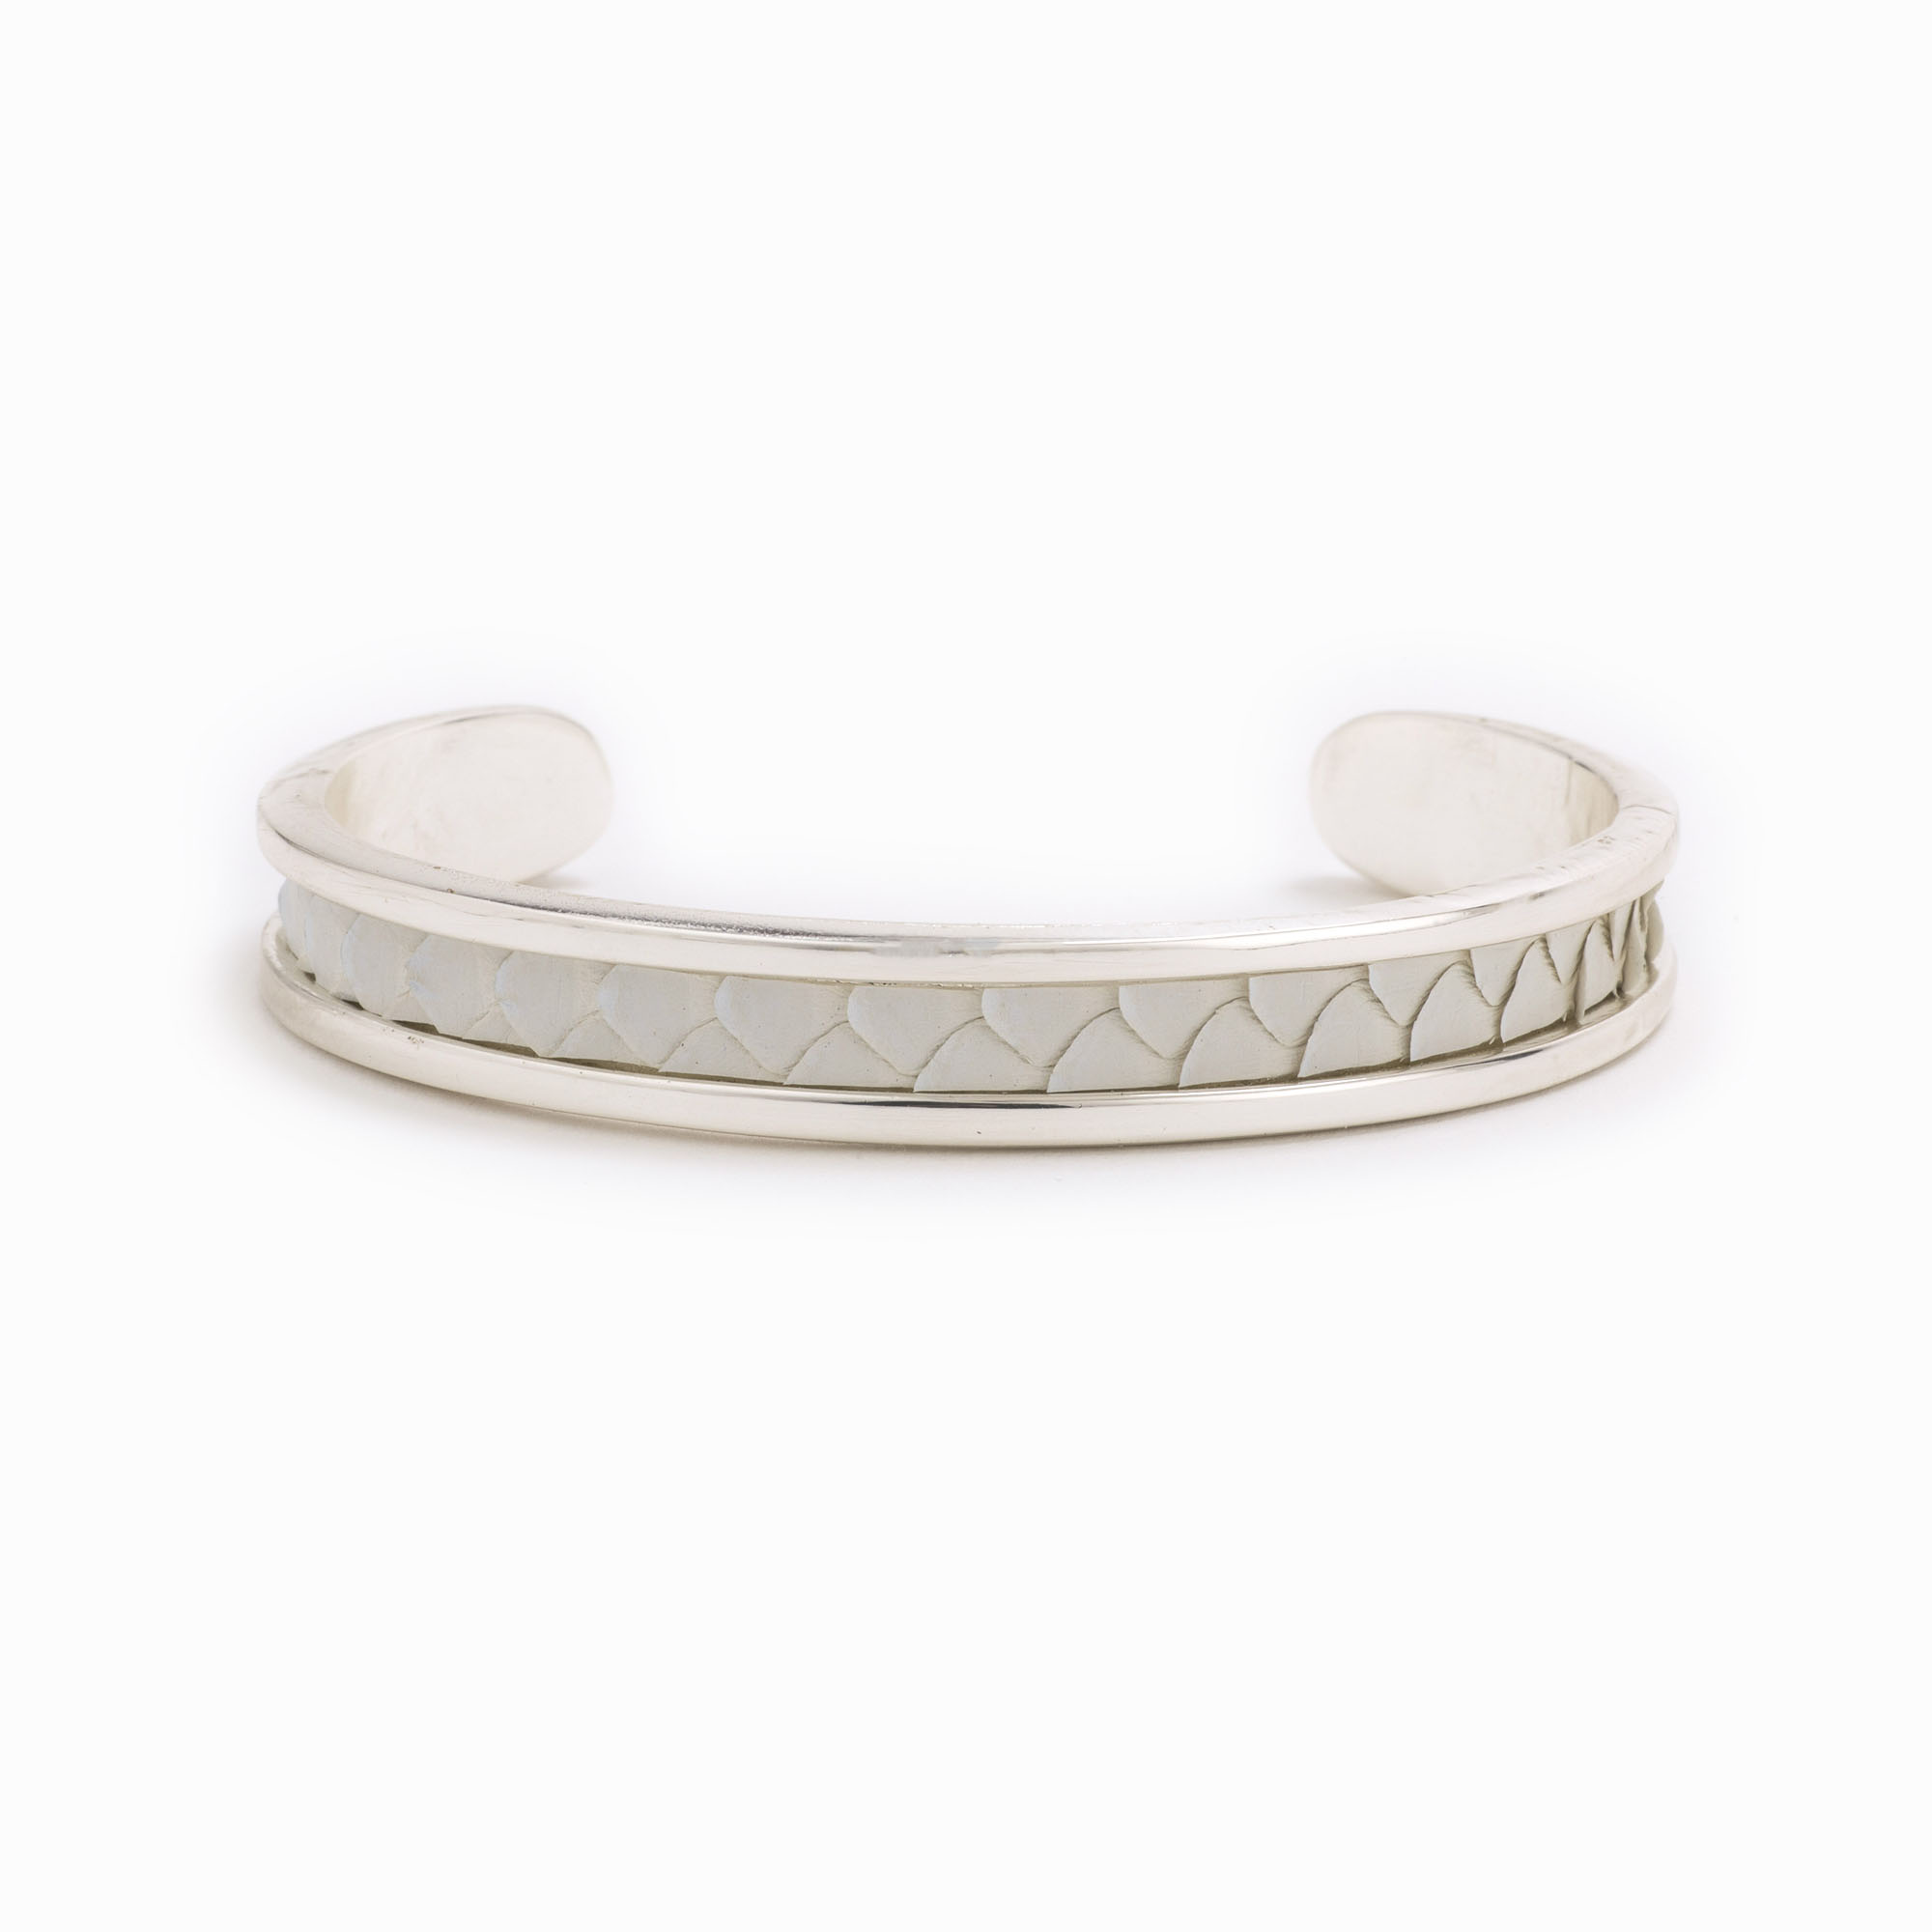 Featured image for “Small White Silver Cuff”